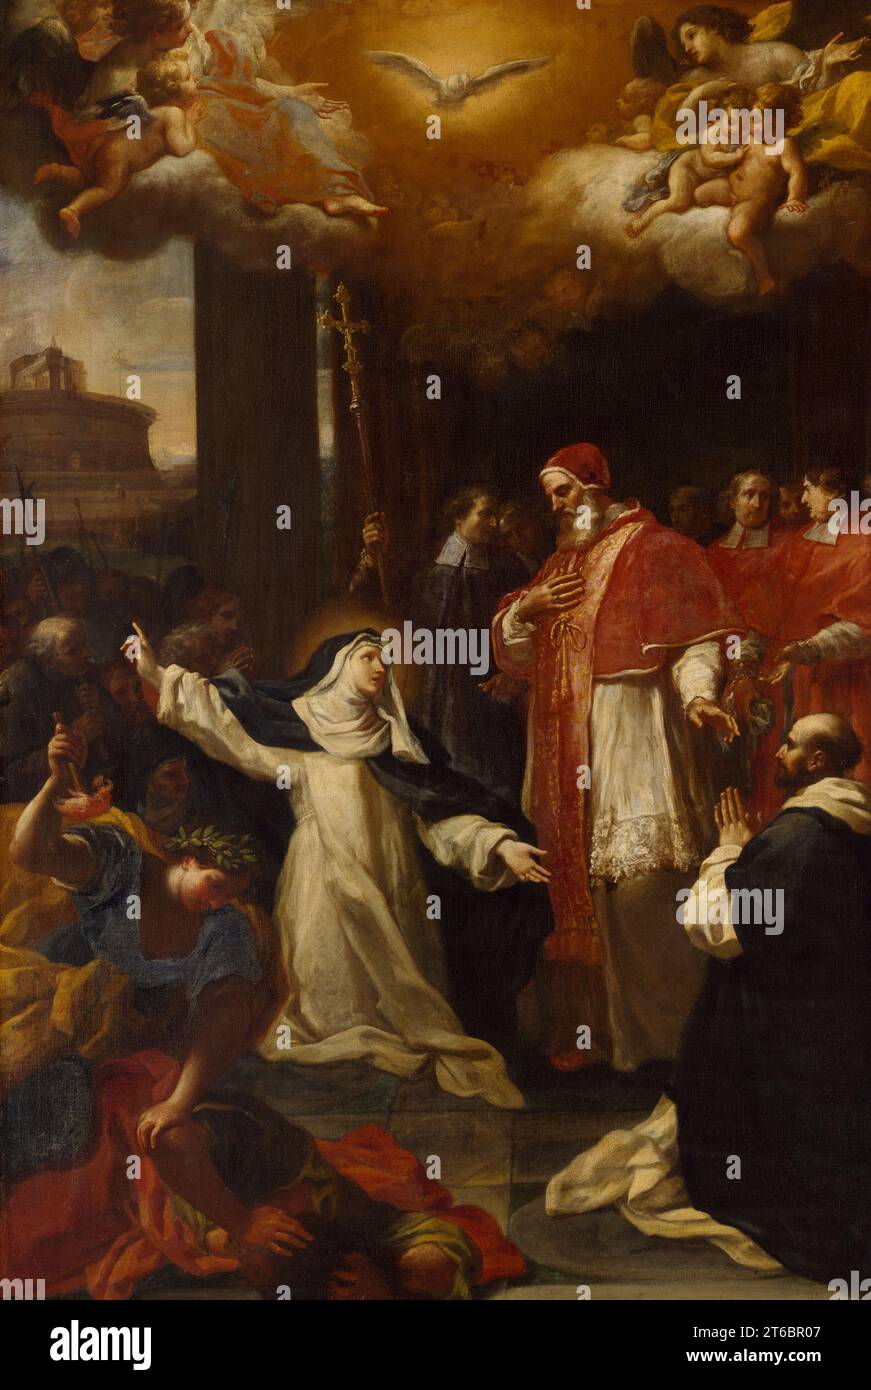 St Catherine Imploring Pope Gregory XI to Return from Avignon to Rome, early-mid 18th century. Catherine is persuading the Pope to return to Rome to end the 'Avignon Papacy' (the period when Avignon was the capital of the papal state); the Eternal City appears as a vision on the horizon. Gregory XI is portrayed with a hand on his chest, looking down, in the act of making a solemn resolution before the cardinals in the background. A crowd of people is trying to enter the palace, and an allegorical depiction (possibly to be identified as Wisdom overcoming Ignorance) closes the image to the left. Stock Photo